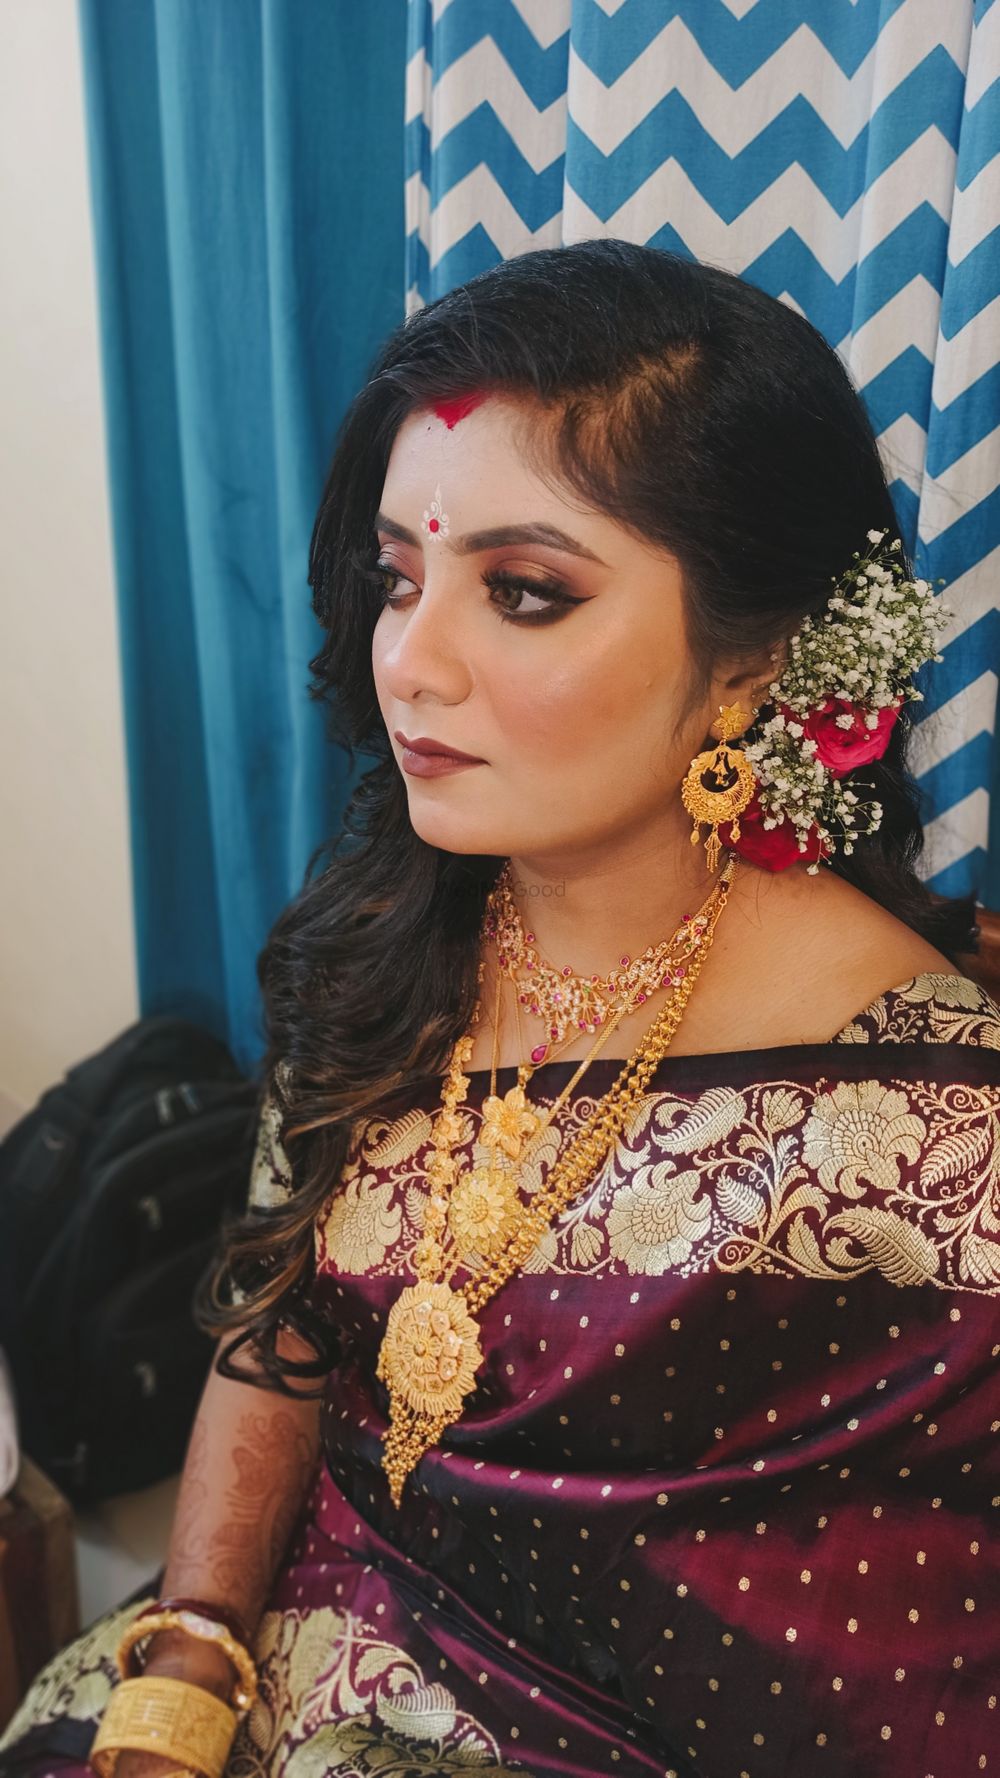 Photo From Bengali Bridal Makeover - By Rupa's Makeup Mirror